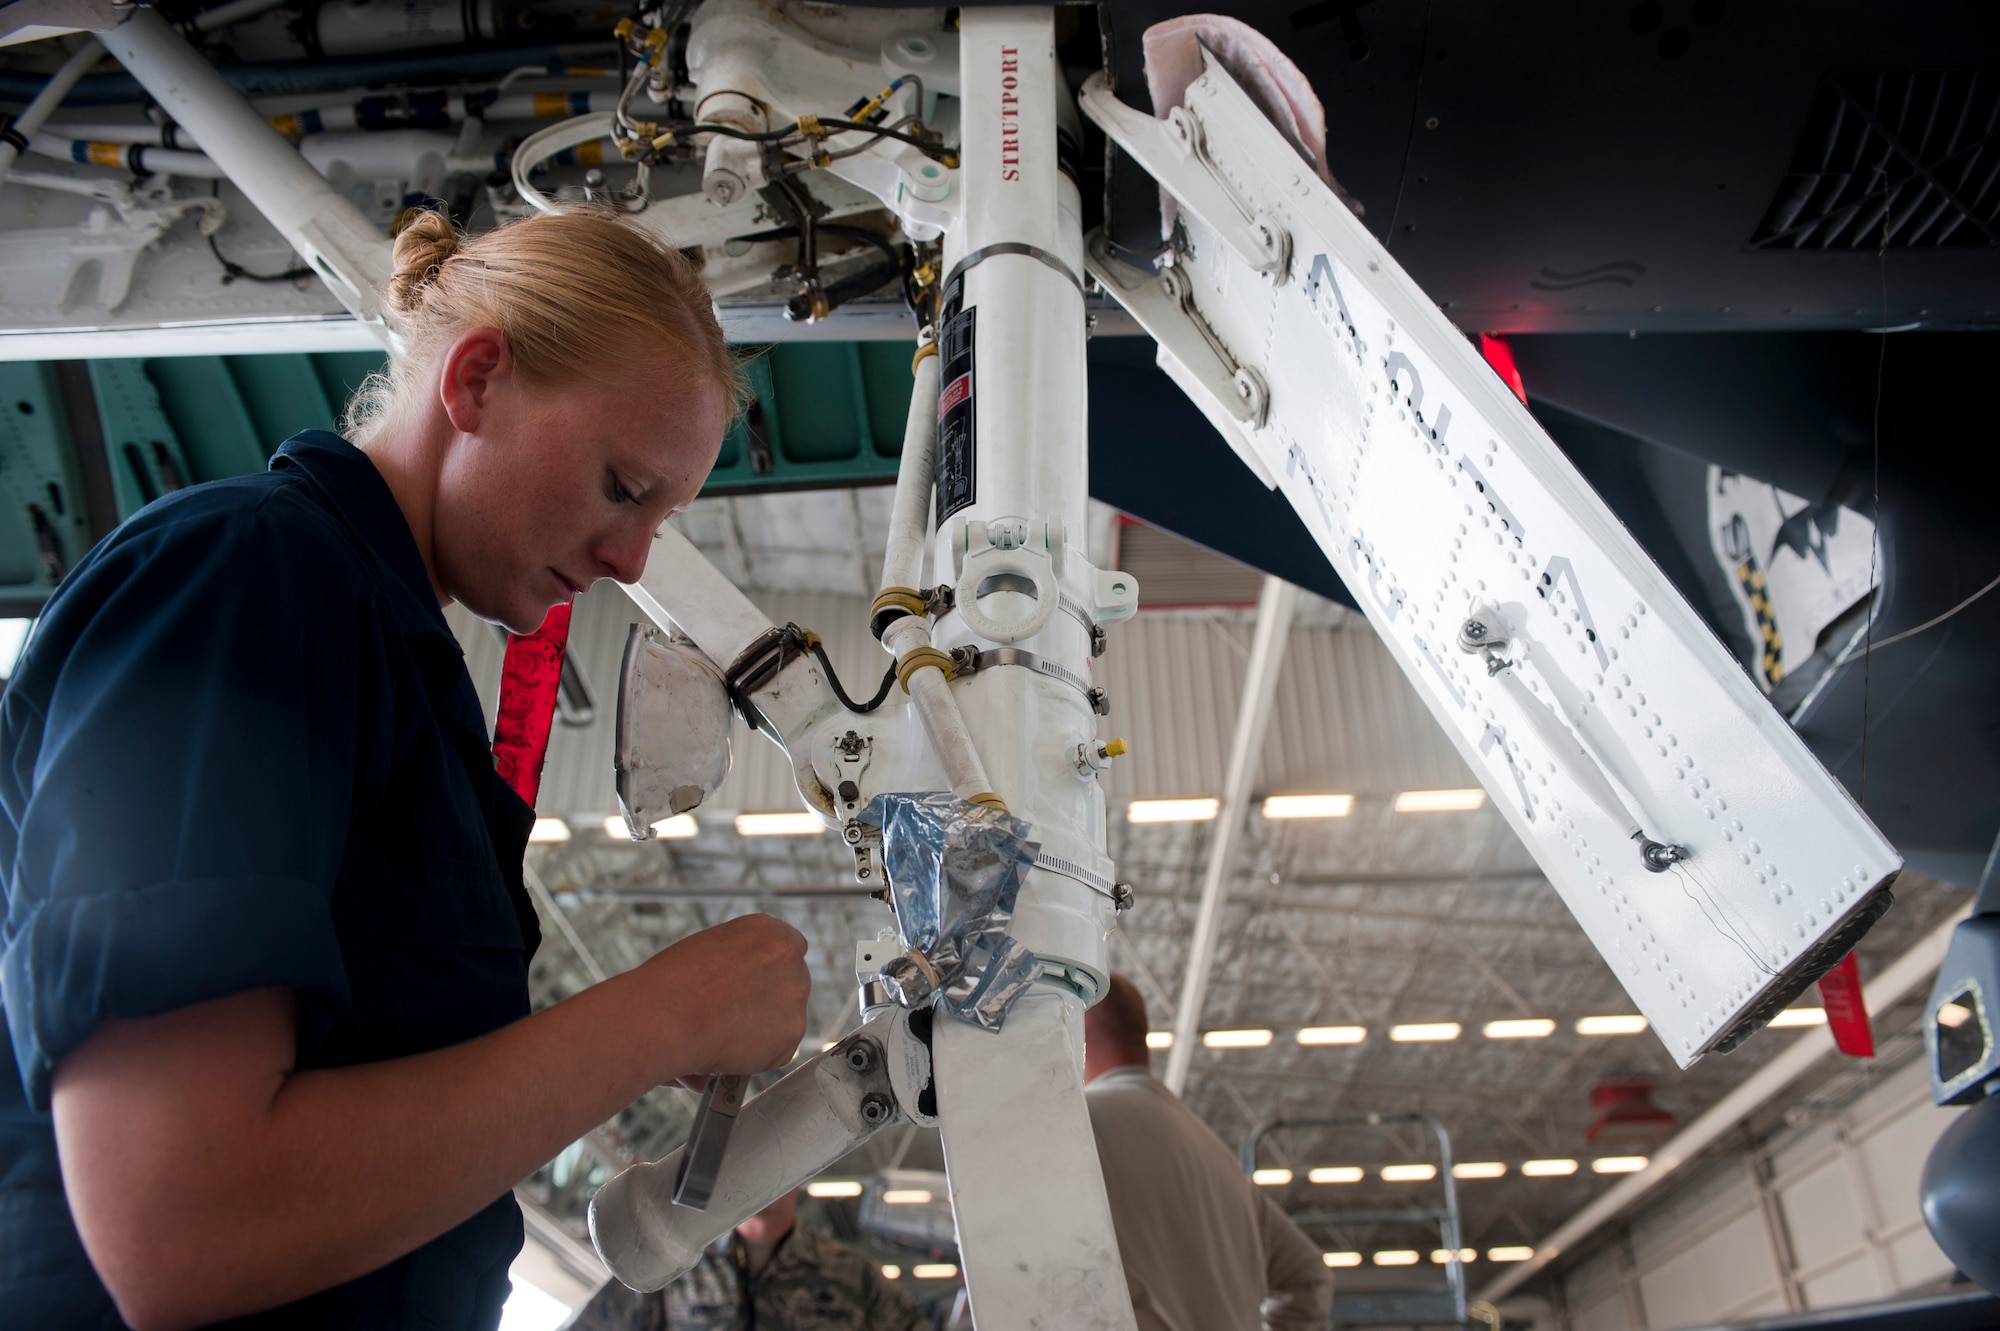 Staff Sgt. Keliah Easley, 757th Aircraft Maintenance Squadron Strike Aircraft Maintenance Unit F-15E Strike Eagle crew chief, installs a nose strut on an F-15E at Nellis Air Force Base, Nev., Aug. 19, 2015. The nose strut helps the front wheel from shimmying. (U.S. Air Force photo by Airman 1st Class Mikaley Towle)